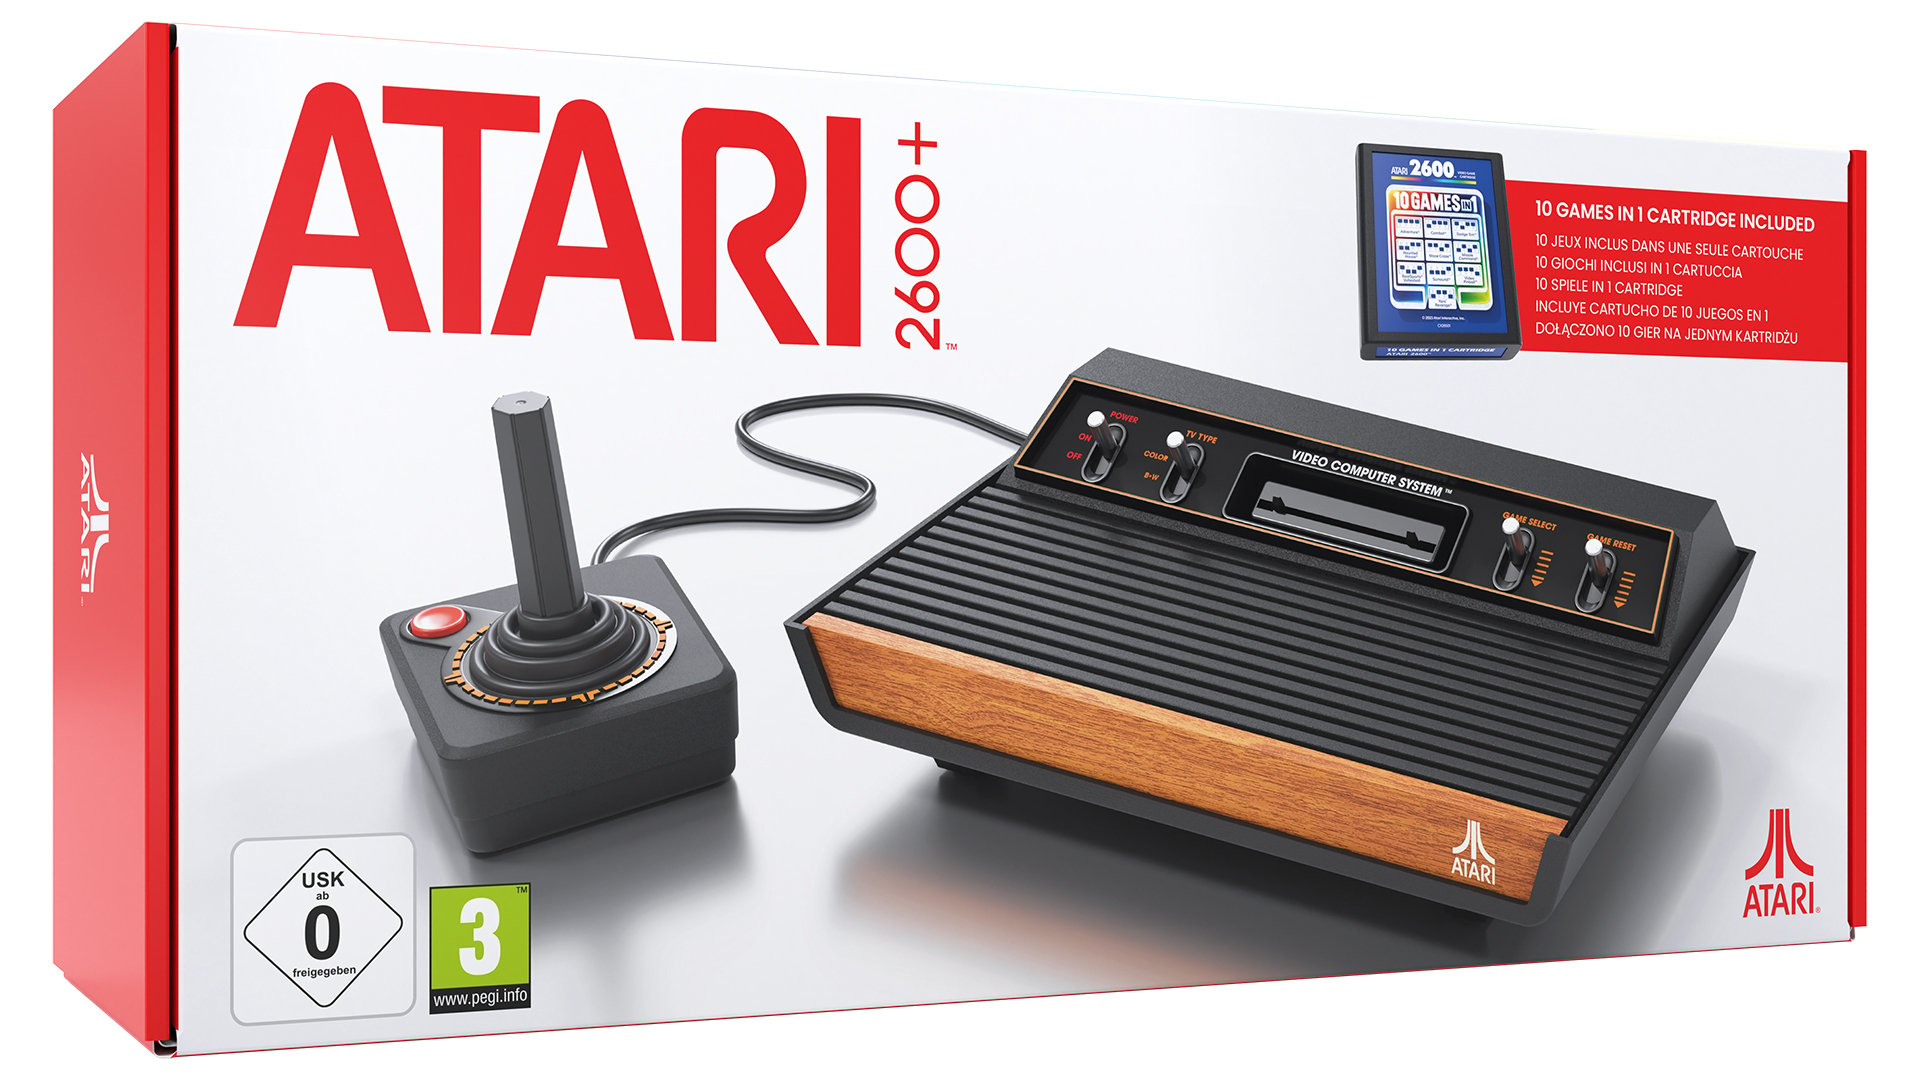 The Atari 2600+ is a modern version of Atari’s classic console which